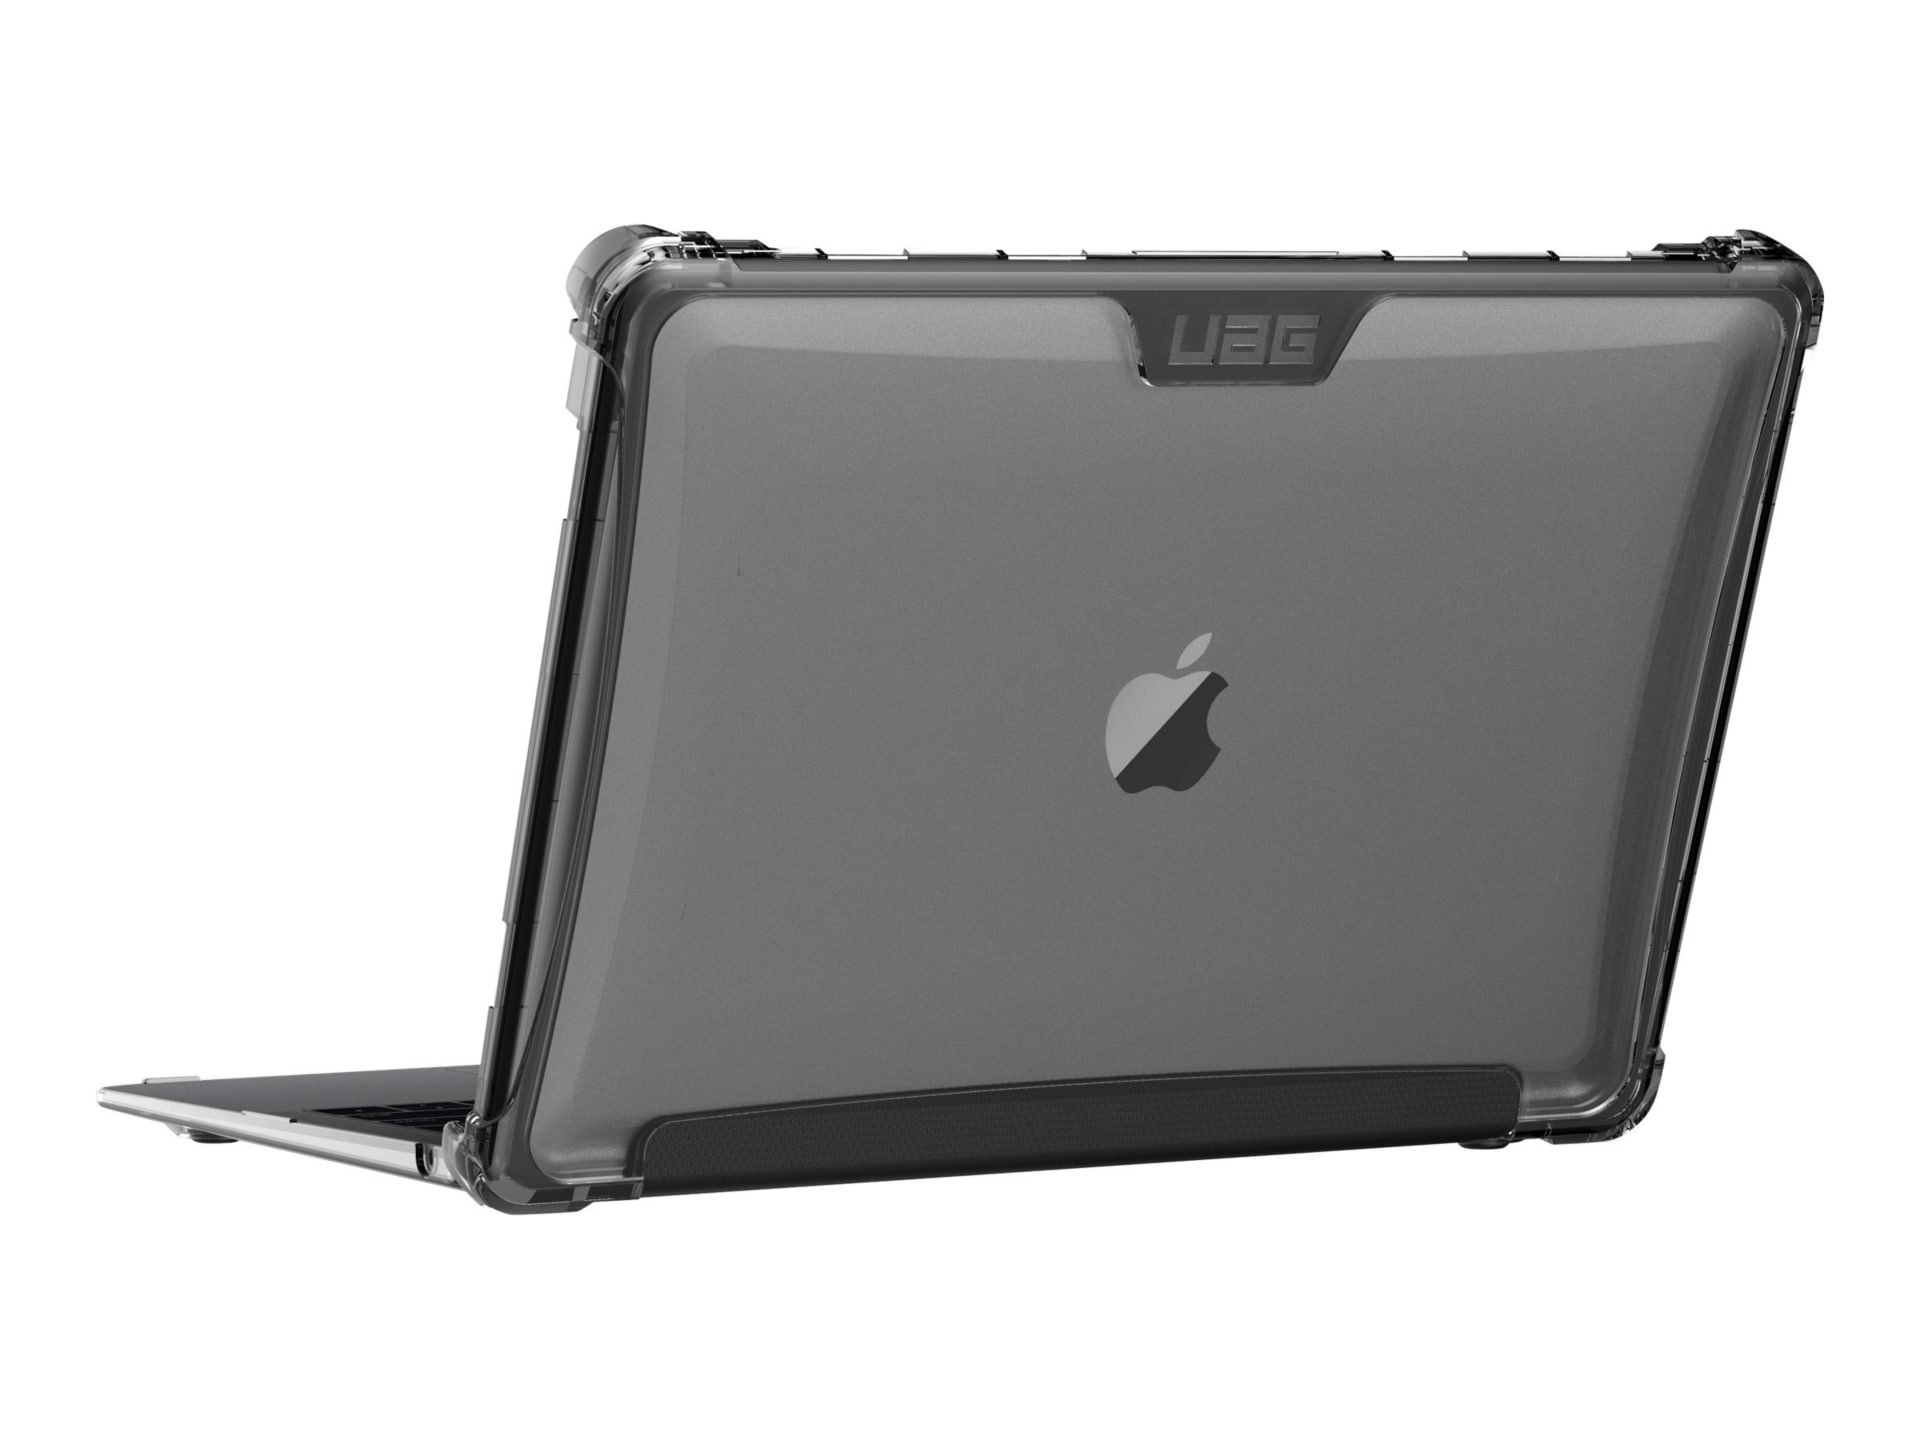 Uag Rugged Case For Macbook Air 13 Inch 2018 A1932 Plyo Ice